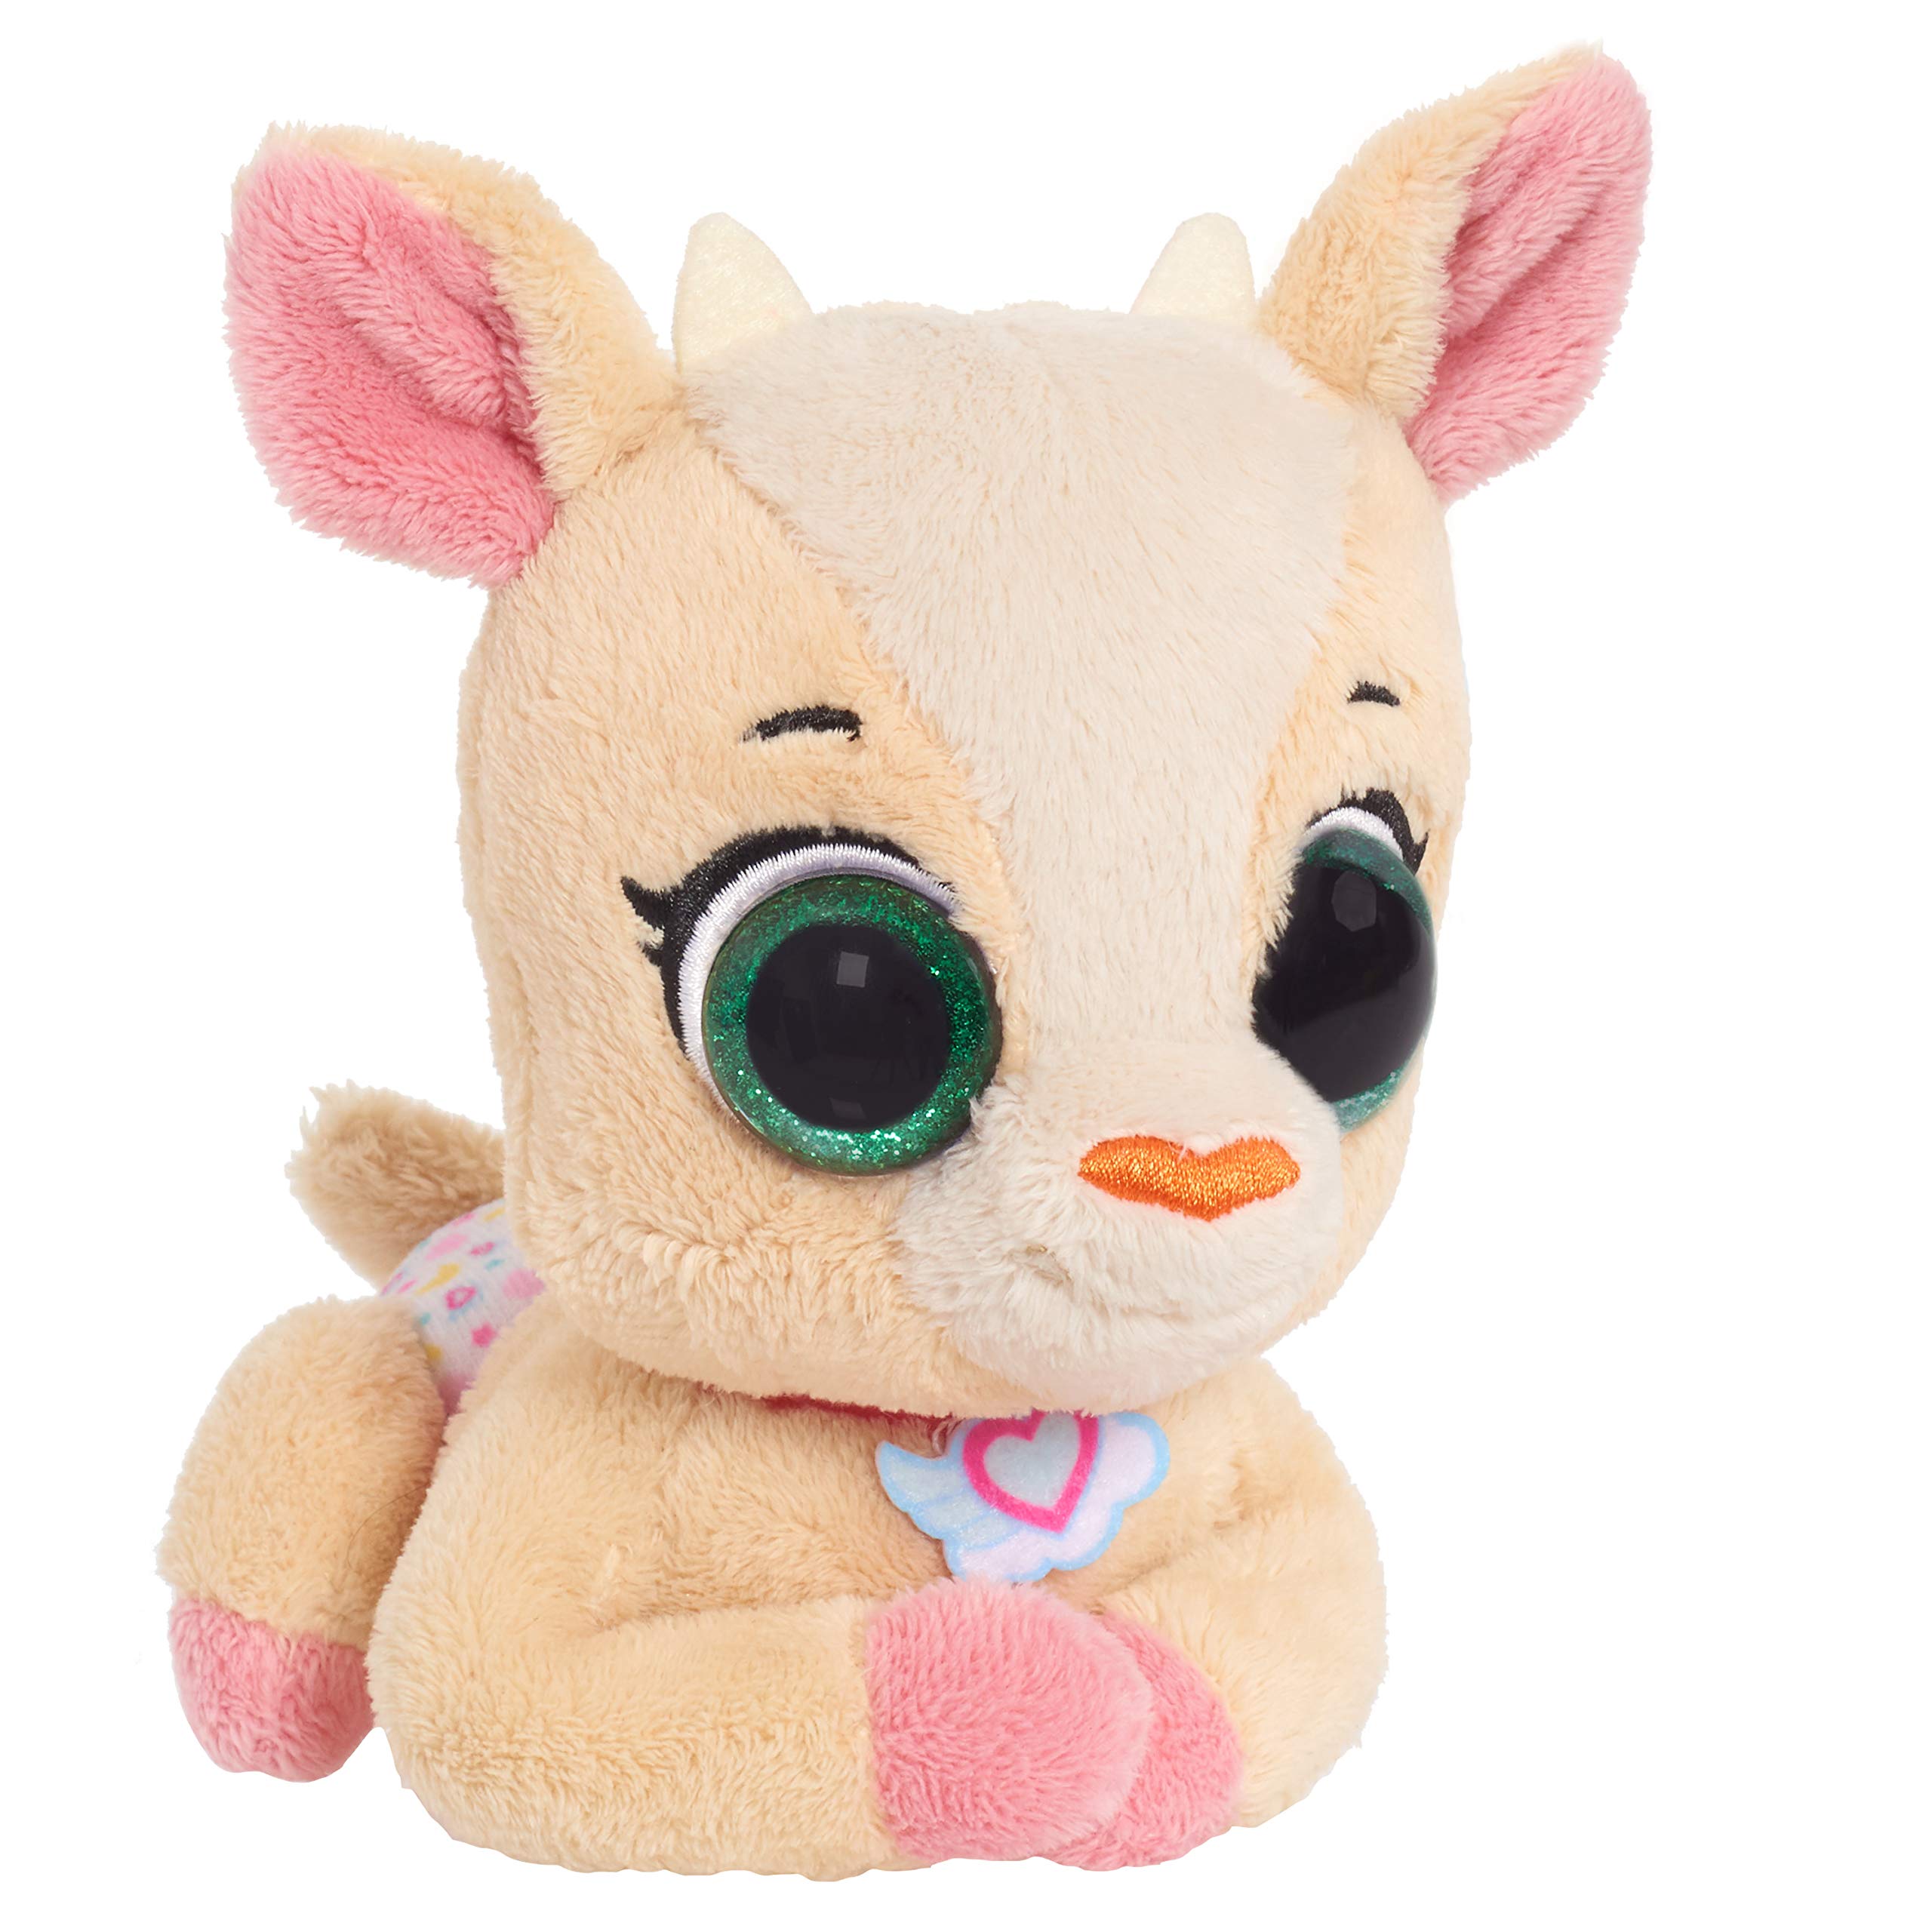 Disney Junior T.O.T.S. 6" Bean Plush Toy: Gracie the Goat $4.40 or Tellulah the Turtle $4.70 + Free Shipping w/ Prime or on $25+